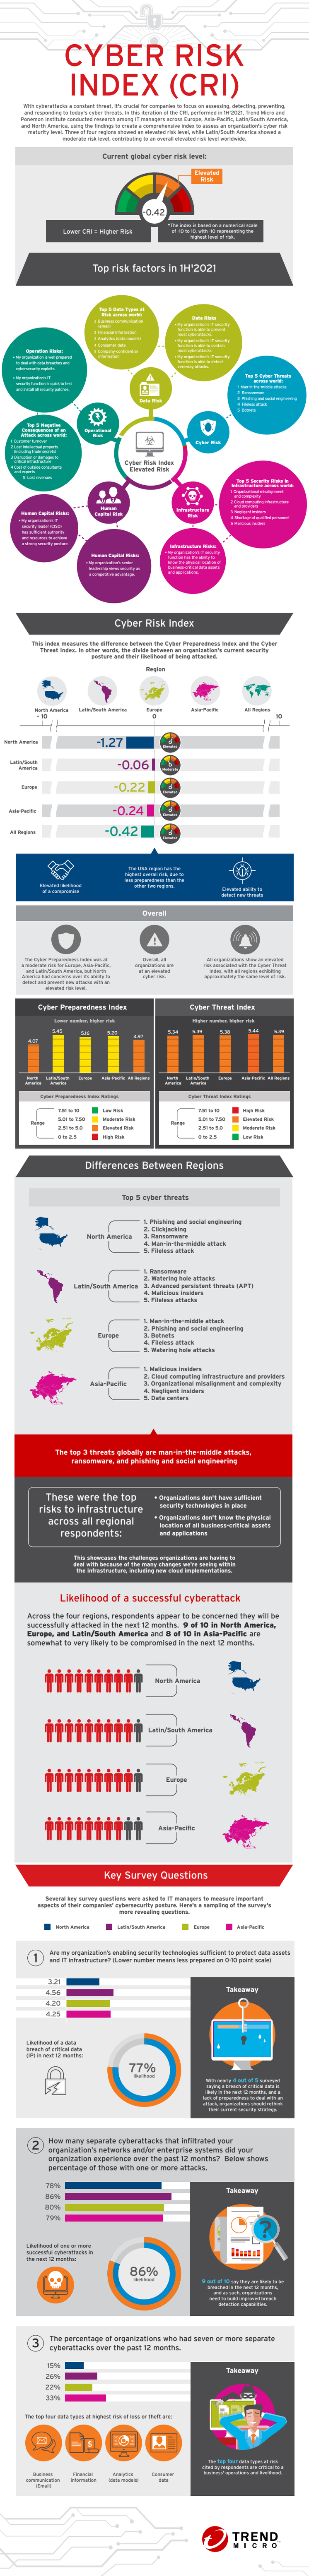 Cyber_Risk_Index_Infographic.pdf